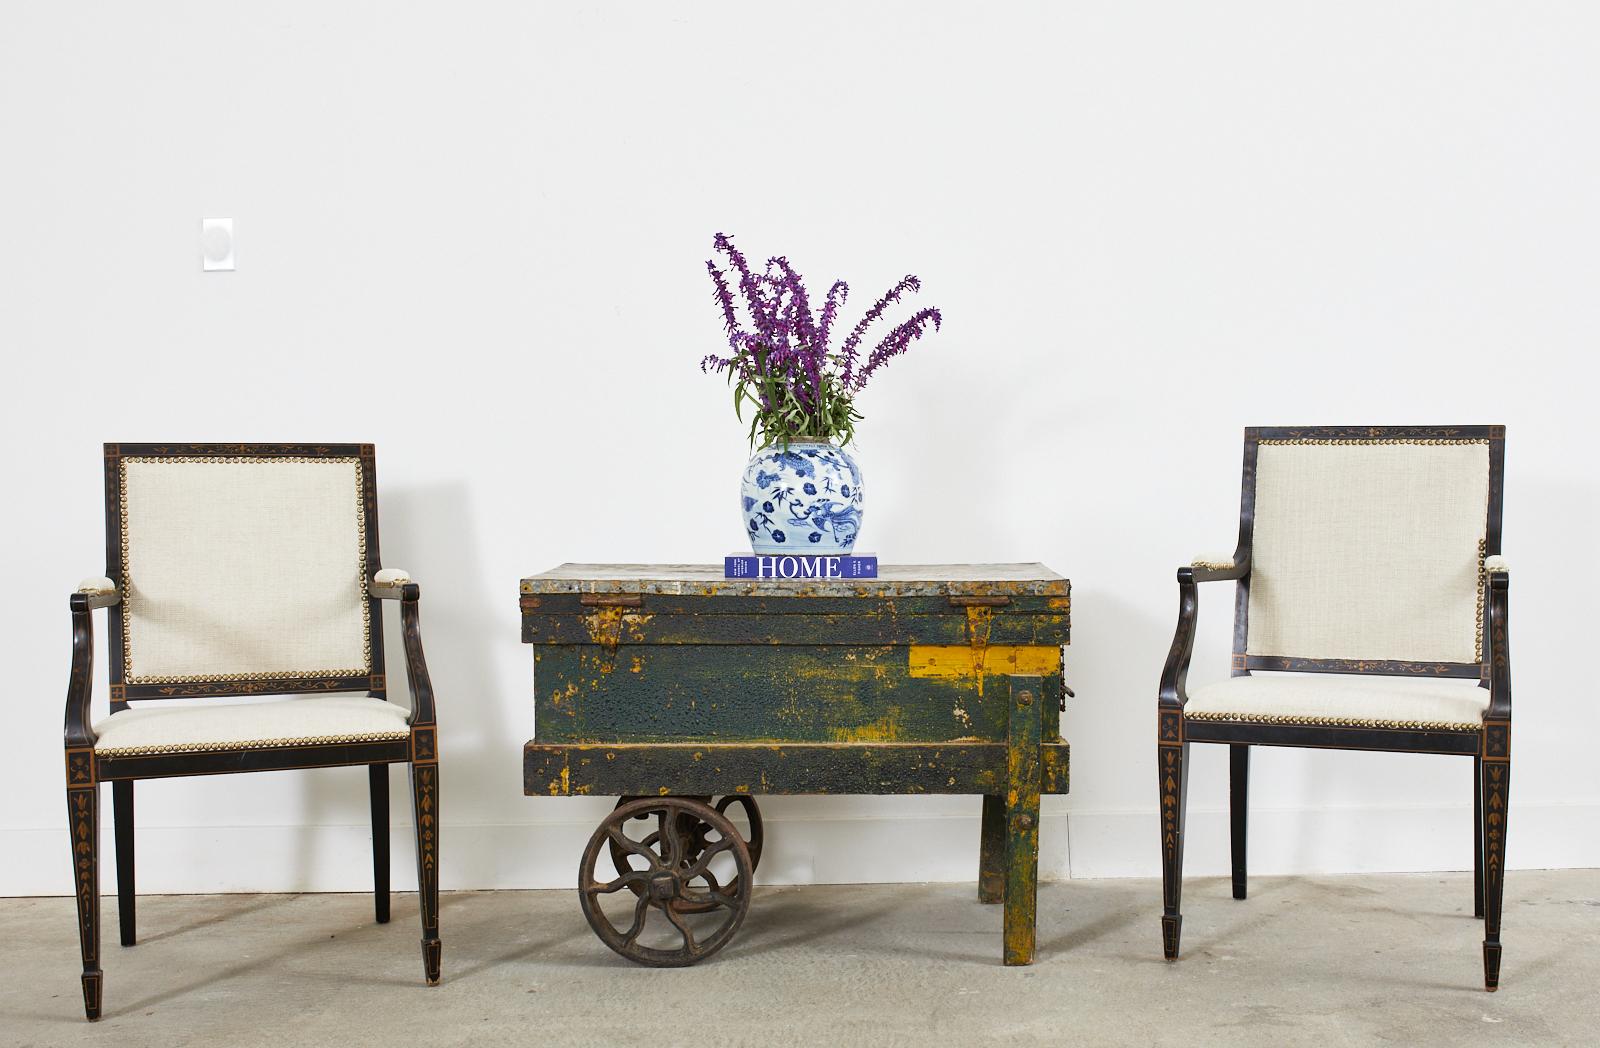 Whimsical 18th century French provincial vendor cobbler's cart featuring a zinc top painted by Ira Yeager (American 1938-2022) for his gallery in Calistoga, CA. Beloved Francophile, Yeager enjoyed painting antique French provincial furniture with